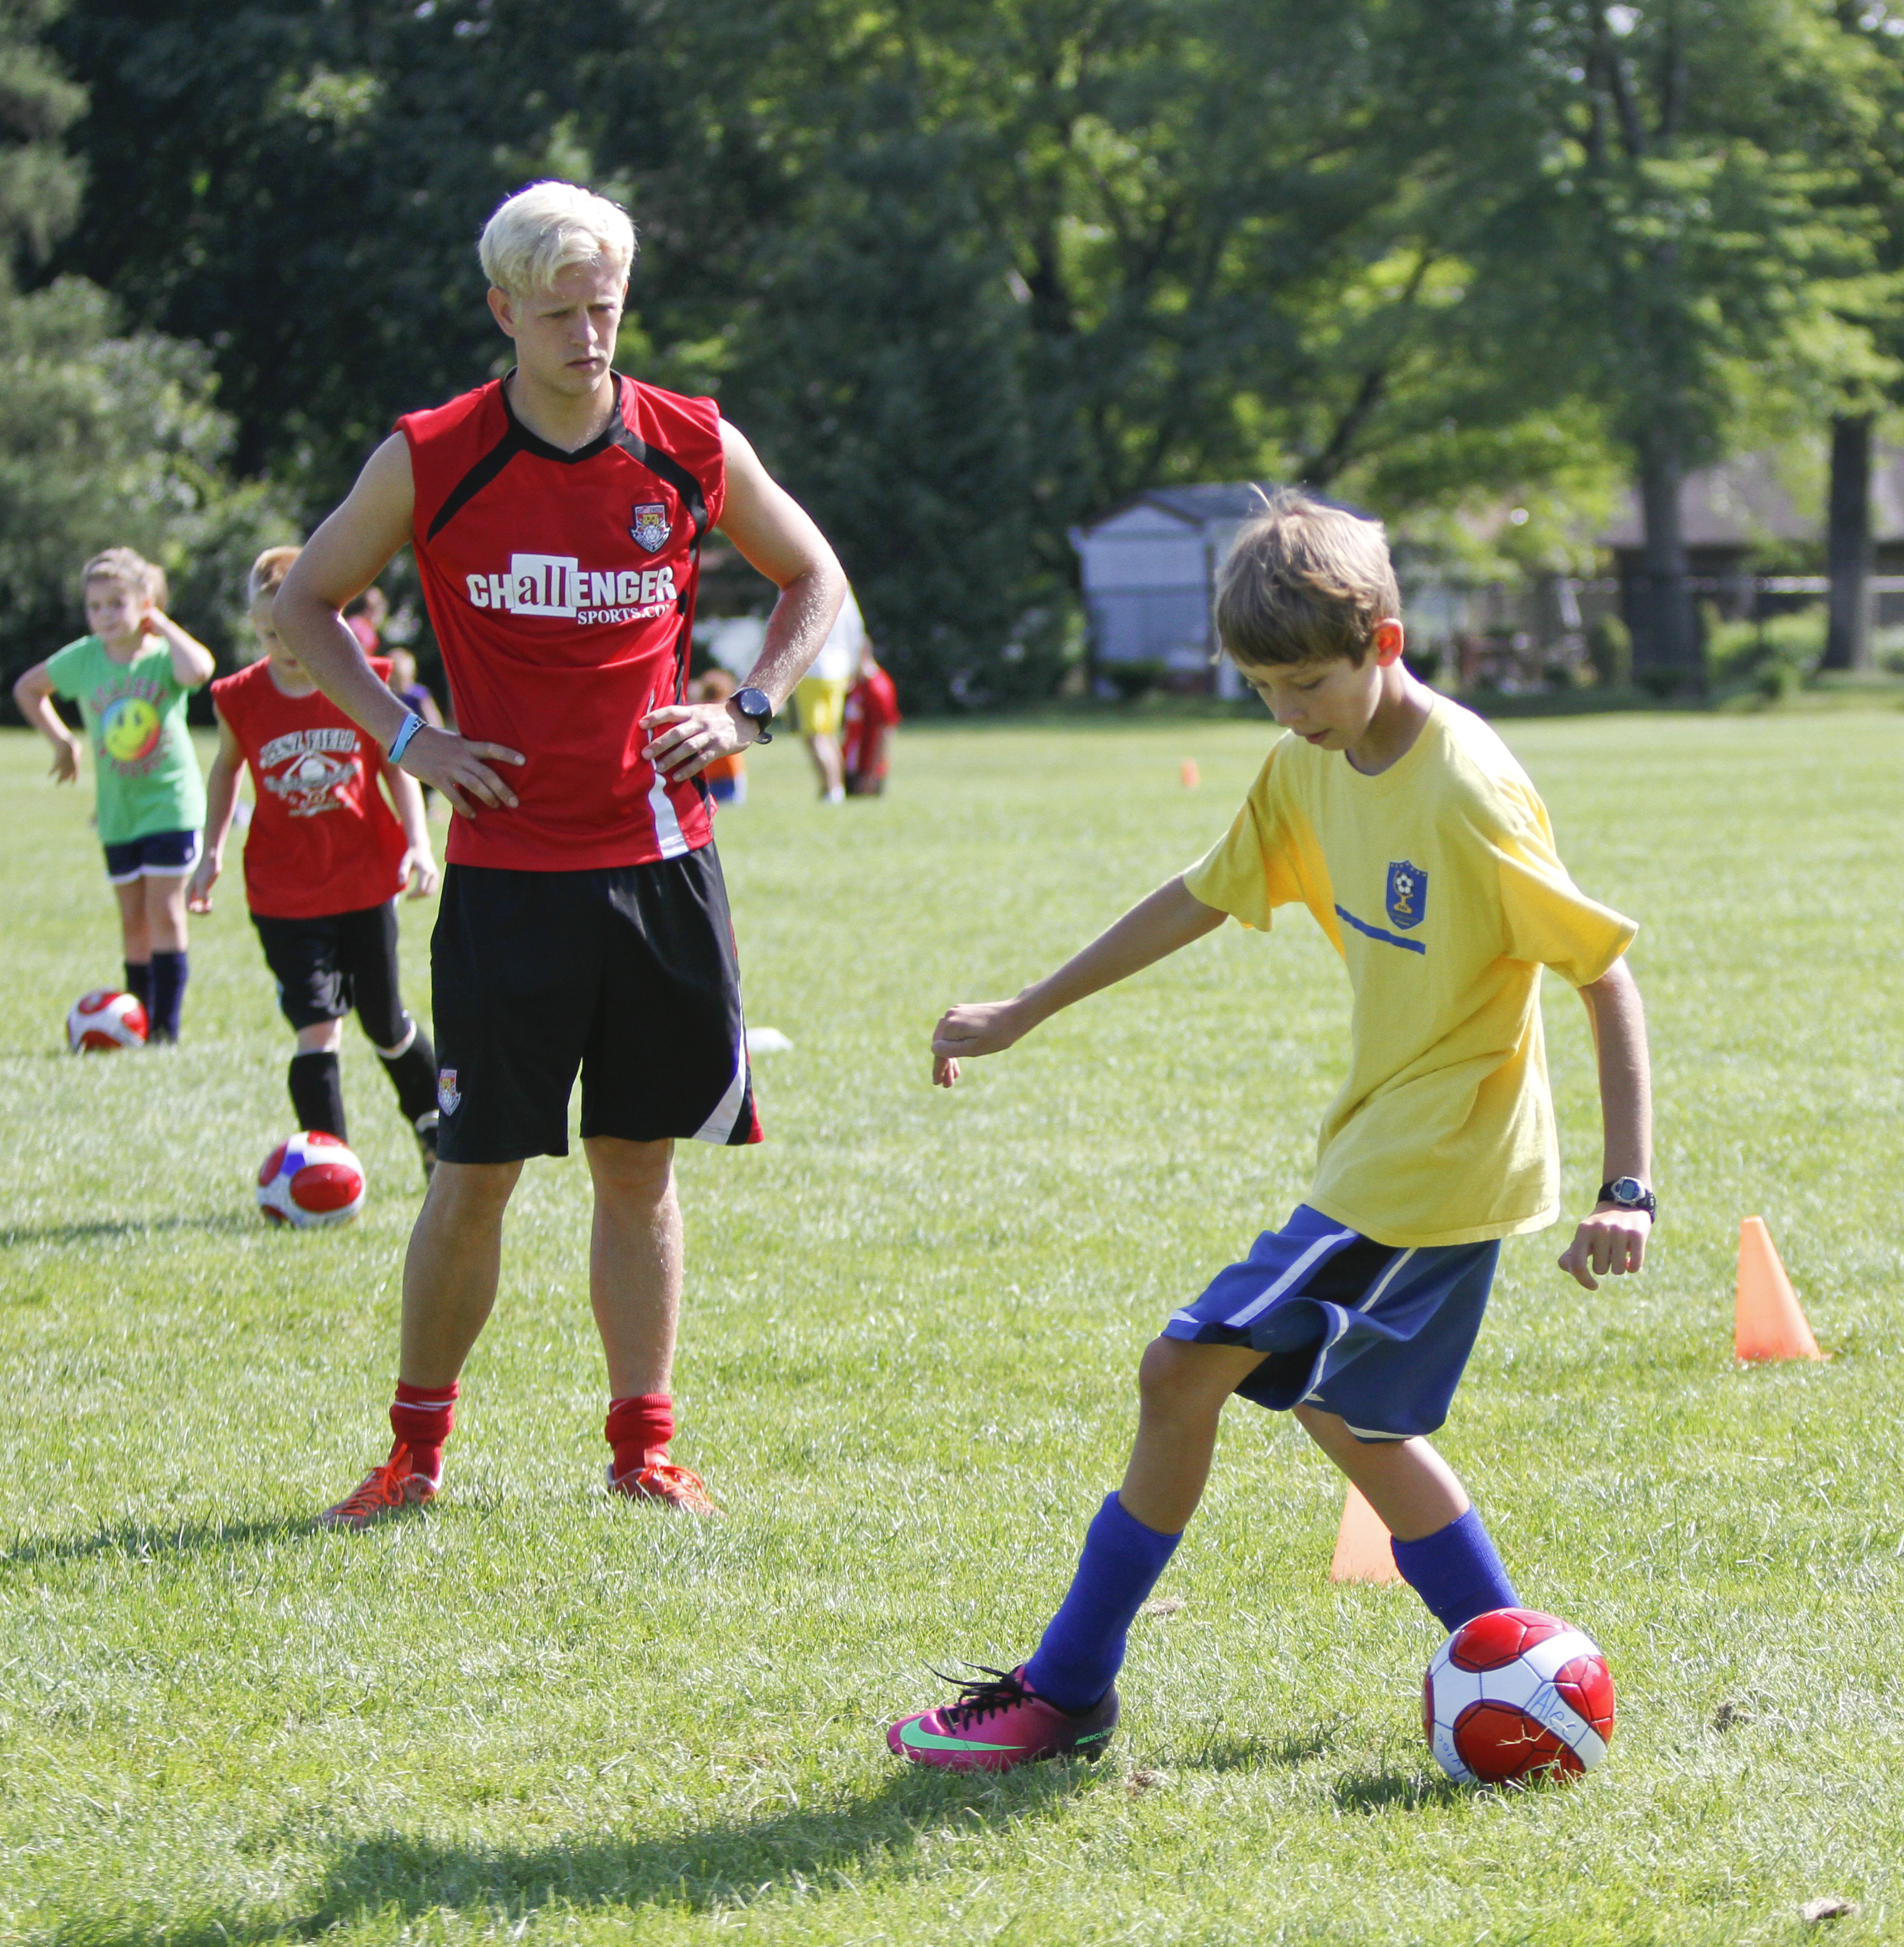        ROBERT K. YOSAY  | THE VINDICATOR

Simon Slater watches as Alec DeBaldo 12 of Austintown   move the ball down the field

British soccer camp   Wick Recreation Area of MillCreek Park week-long soccer camp focuses on building skills to play the game along with sportsmanship